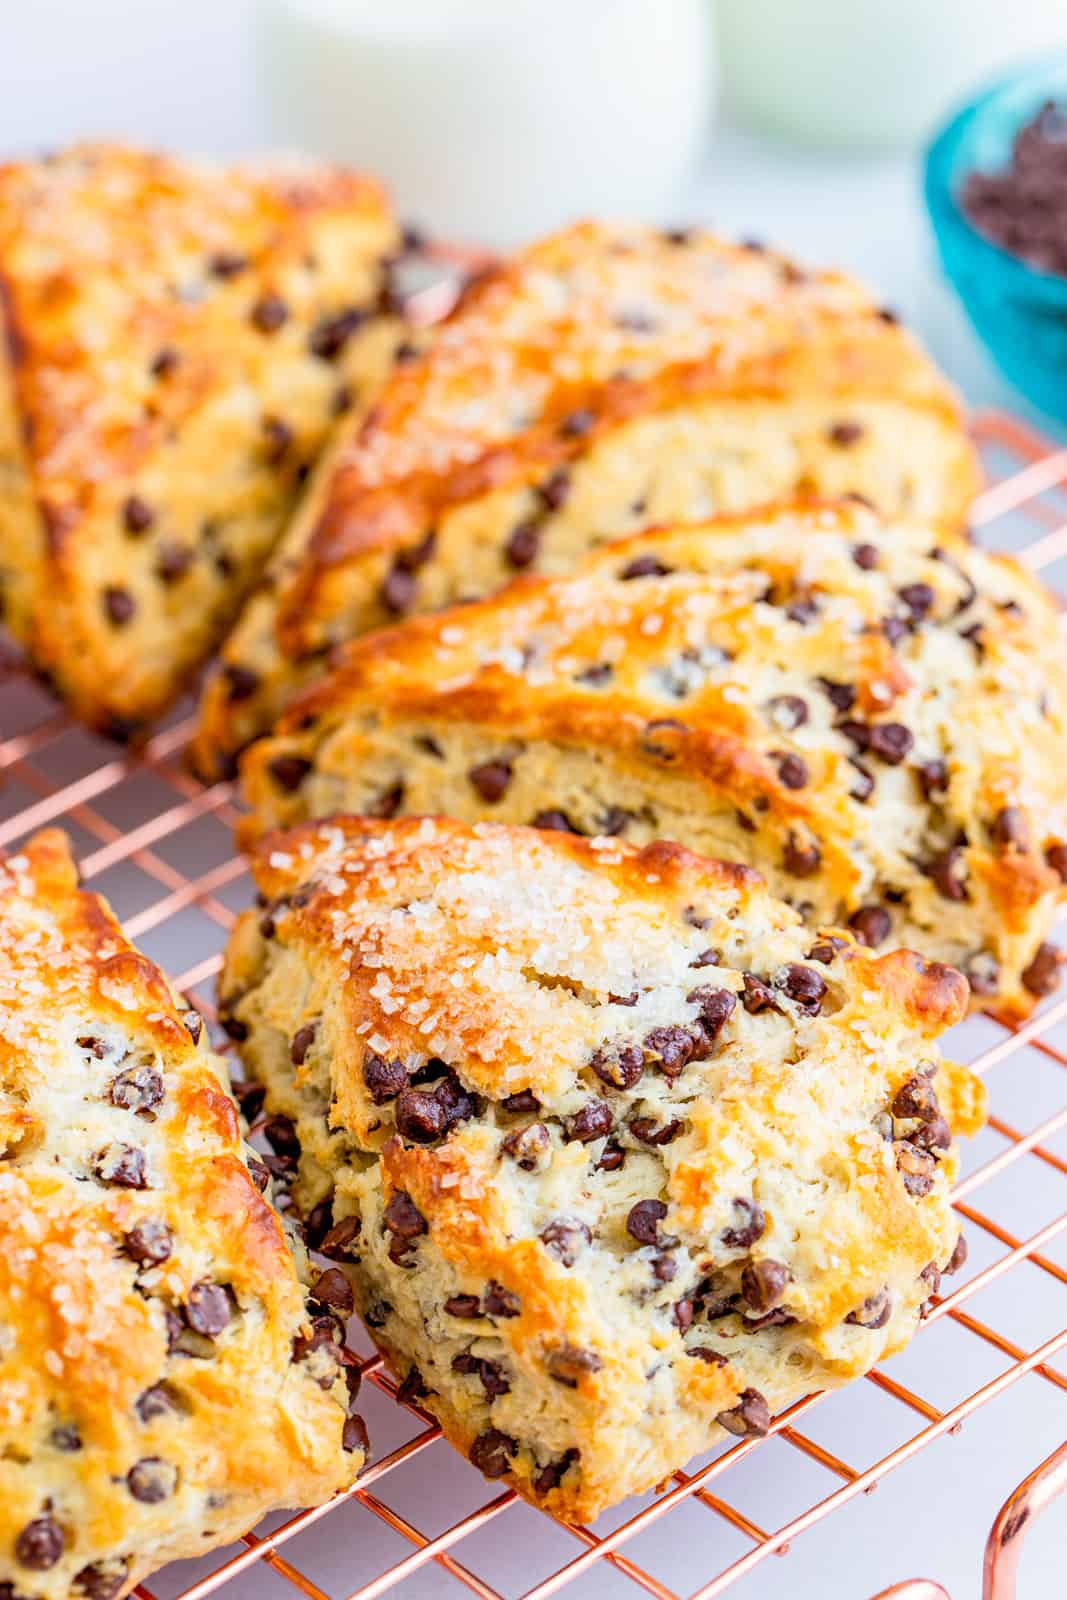 Chocolate Chip Scones on wire rack.